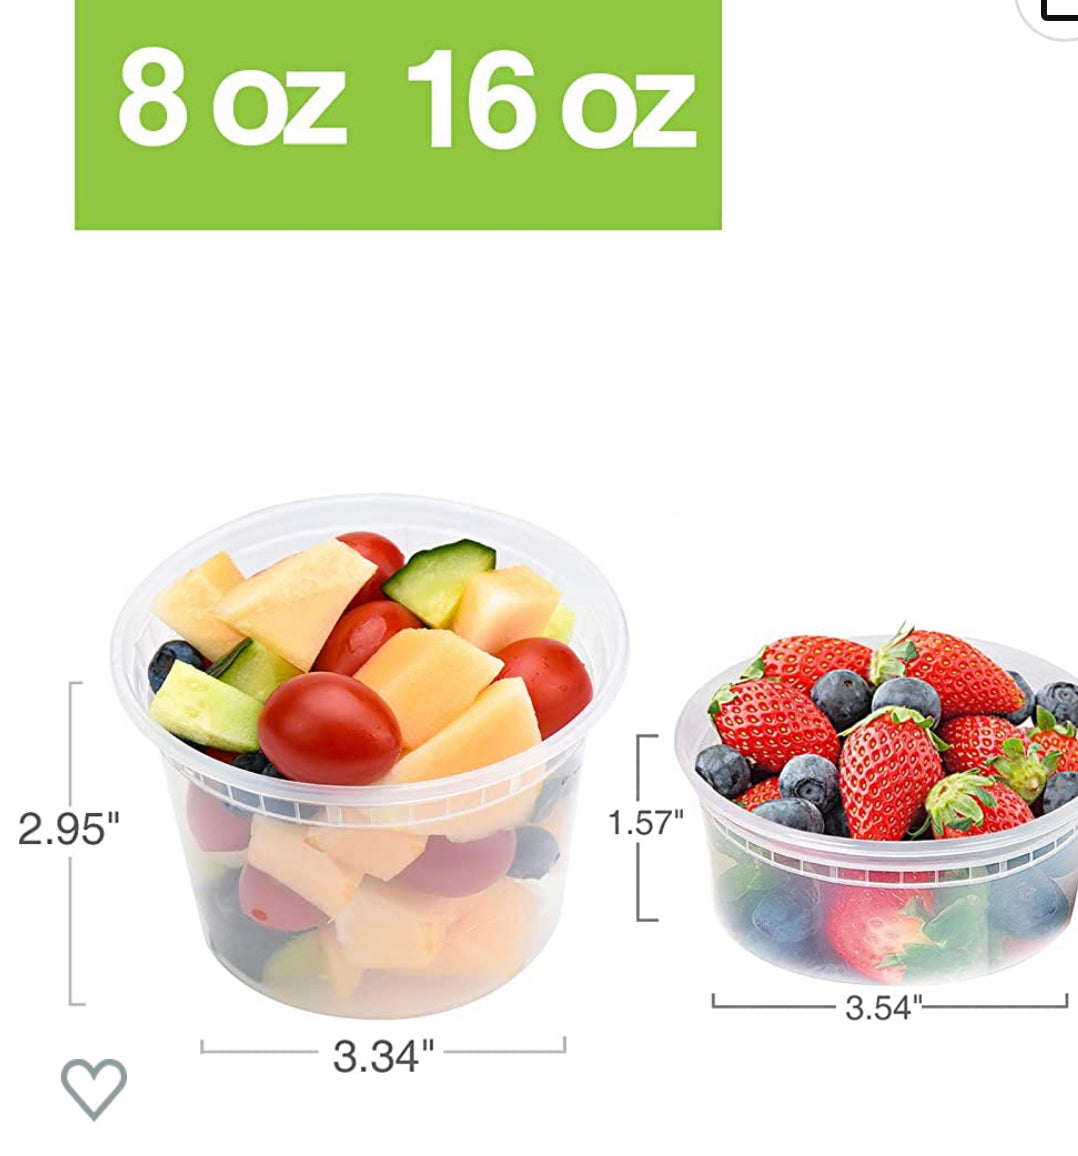 Bag and Container Sizes